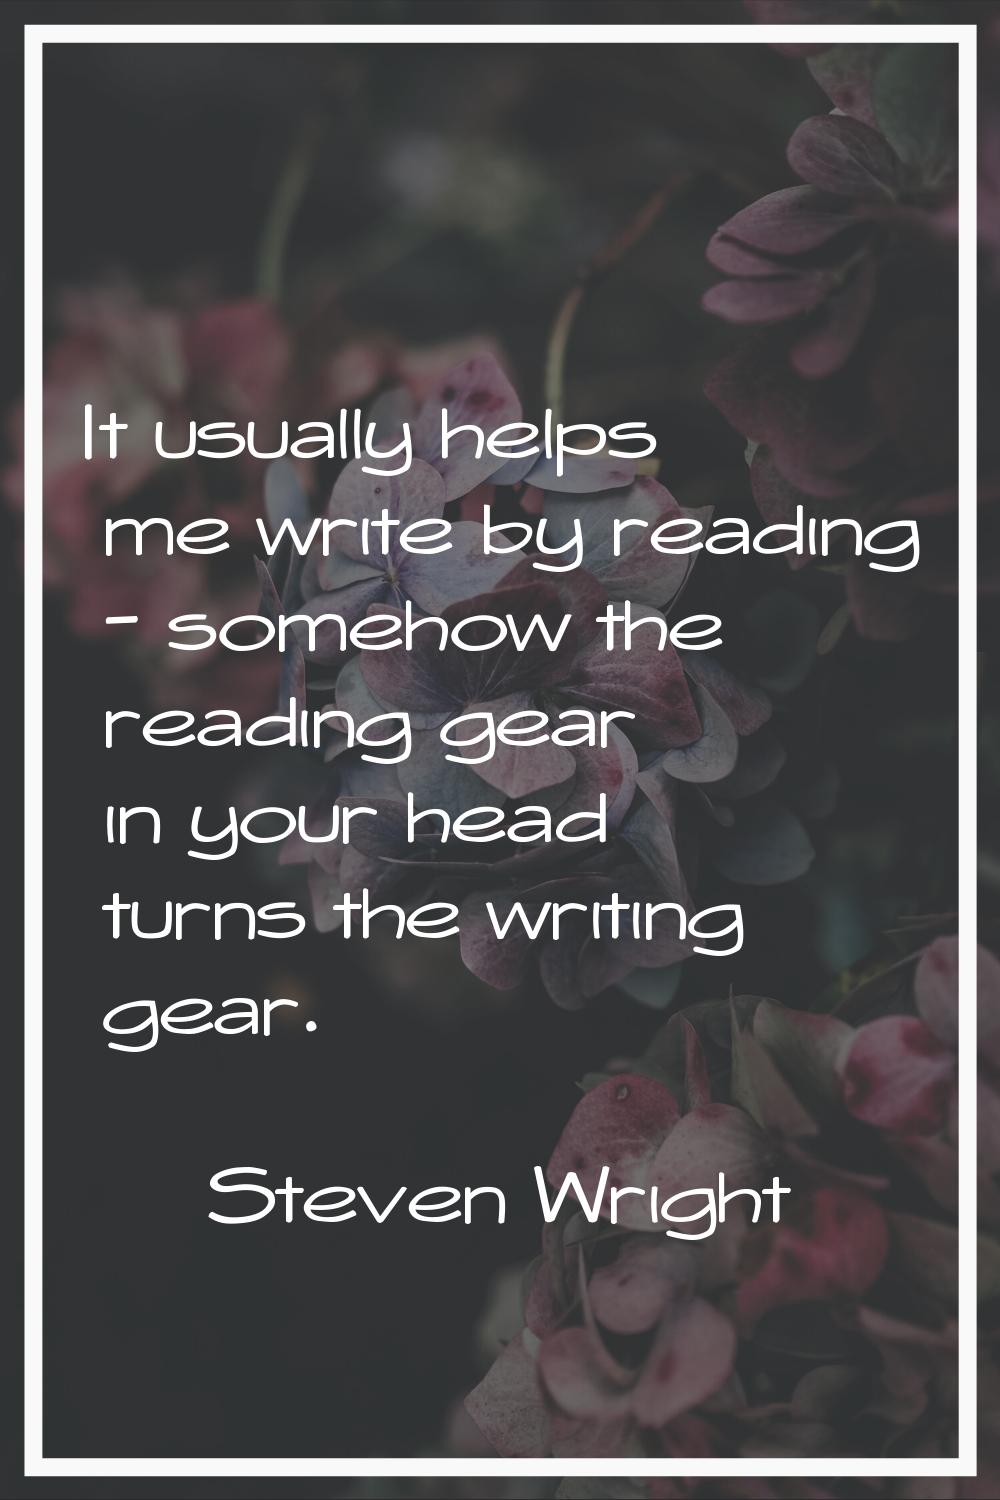 It usually helps me write by reading - somehow the reading gear in your head turns the writing gear